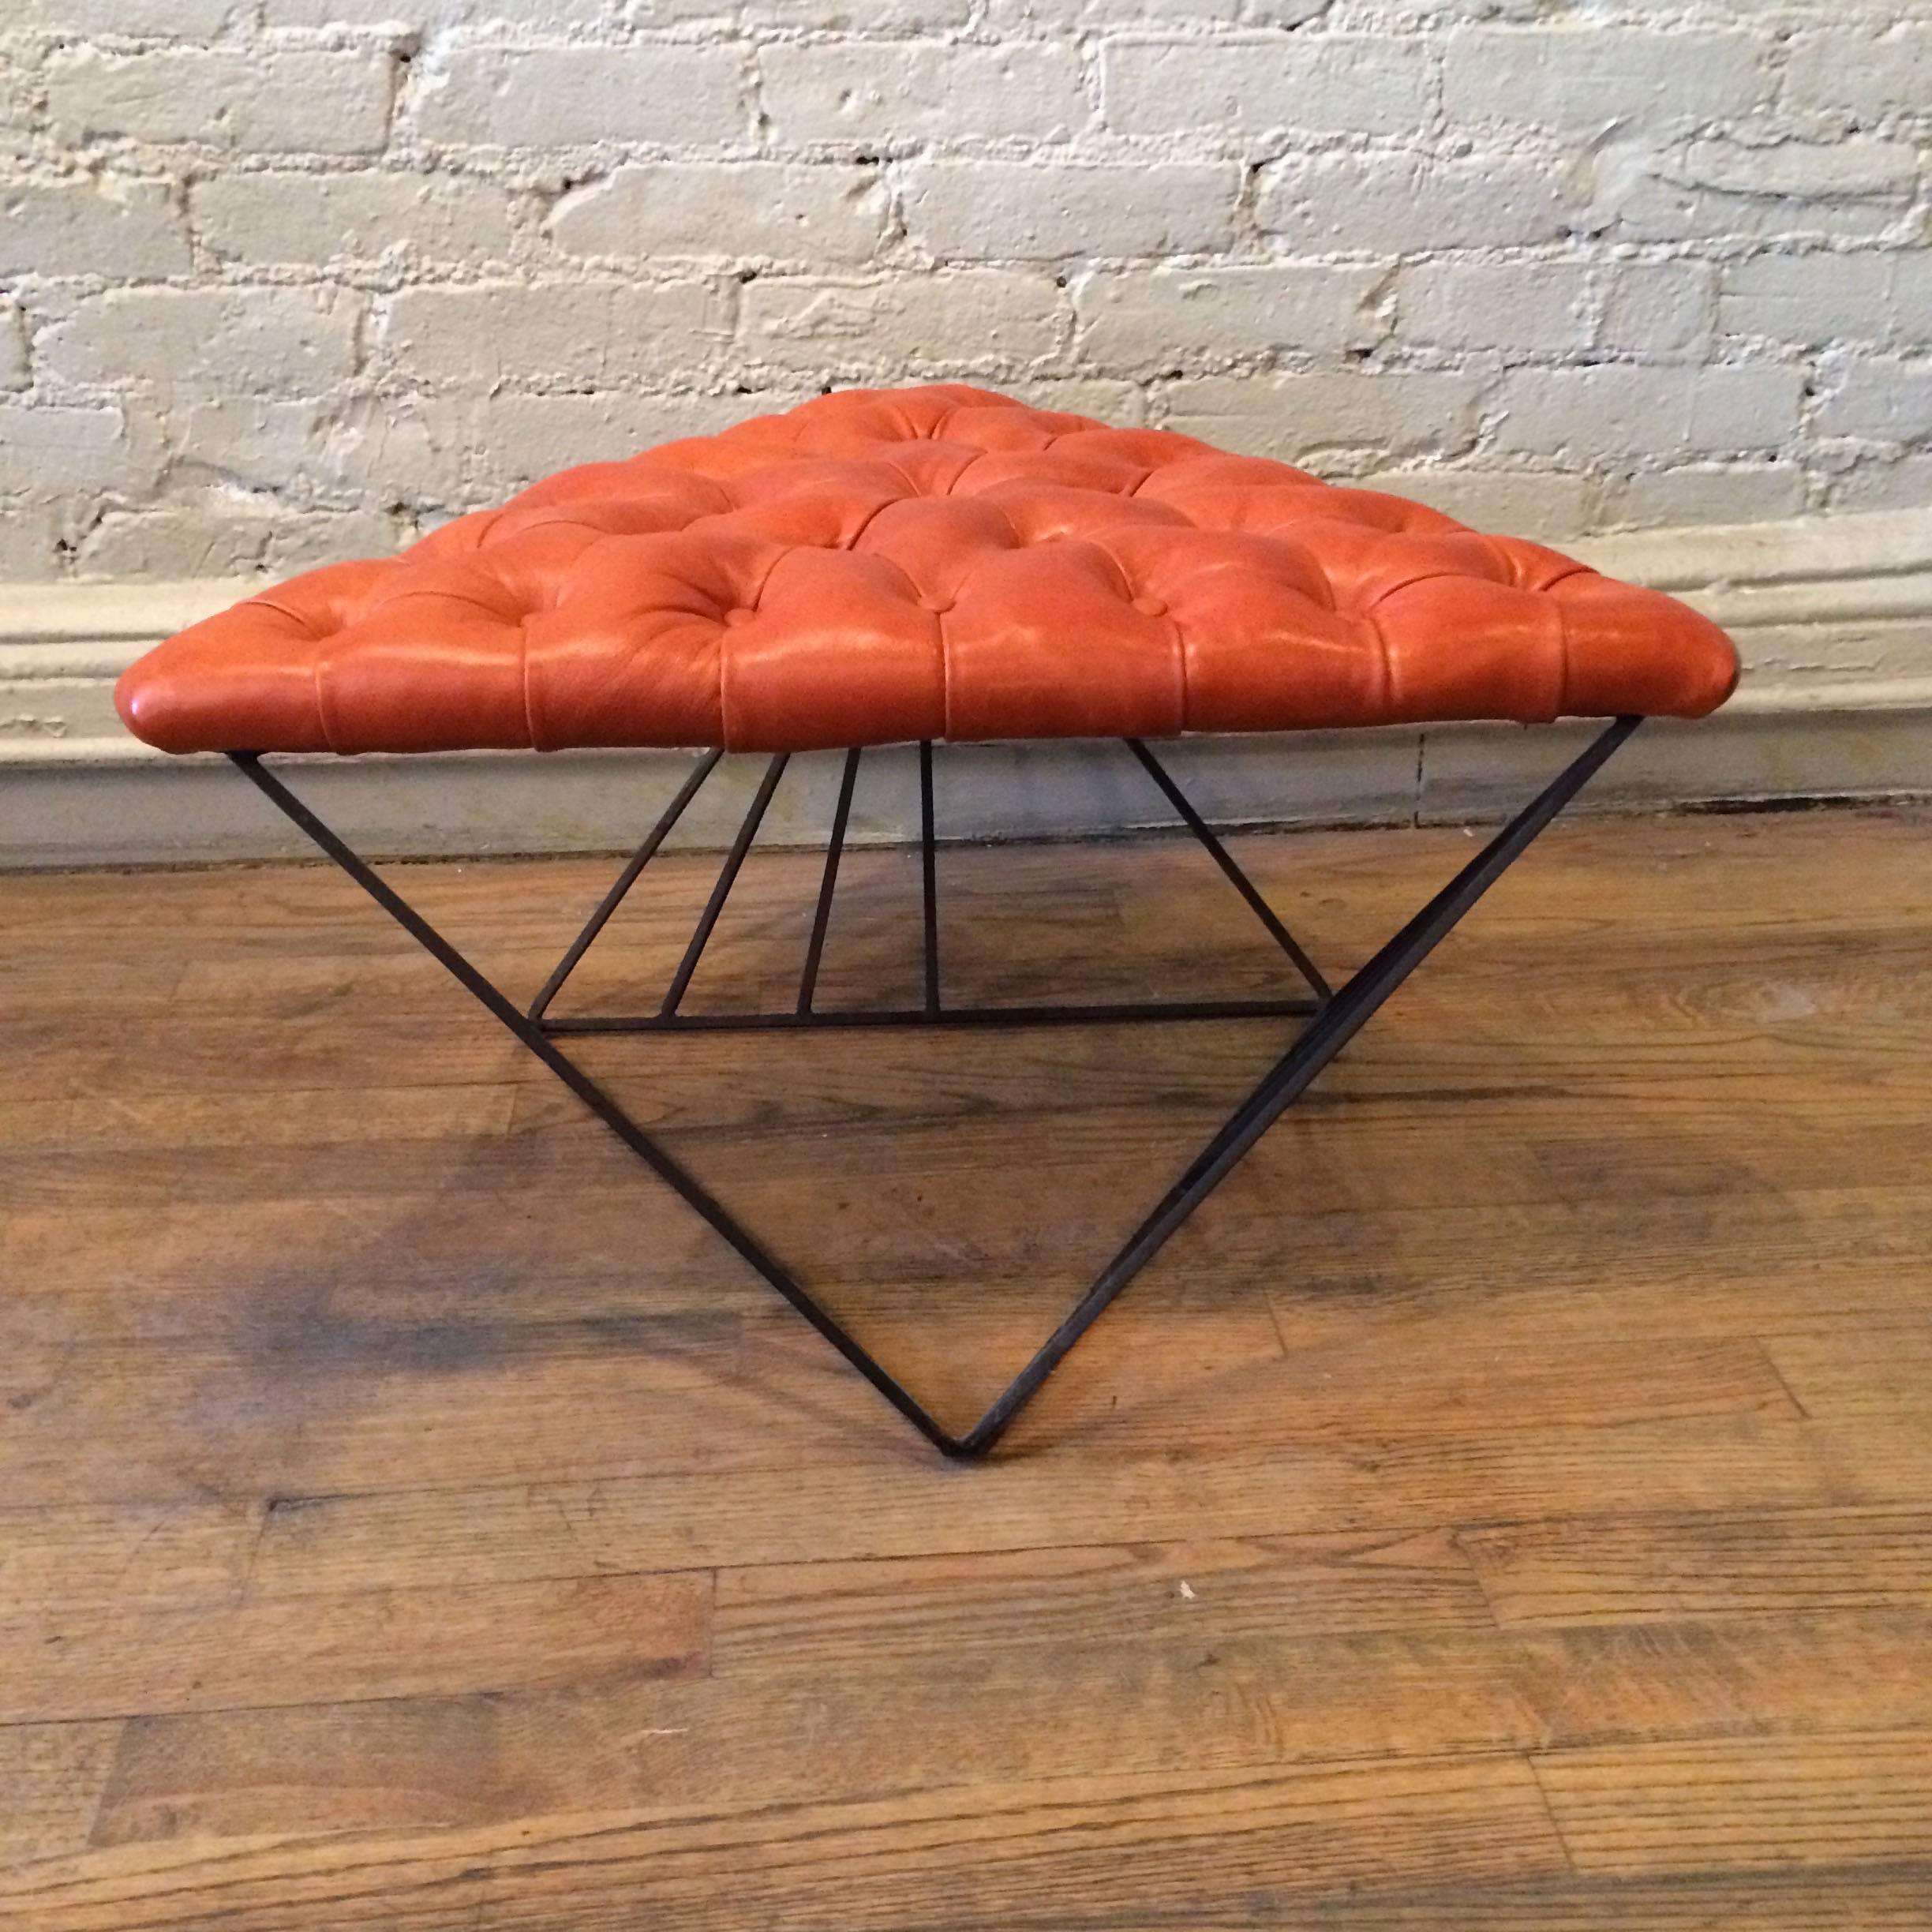 Mid-20th Century Modernist Leather And Geometric Wrought Iron Ottoman